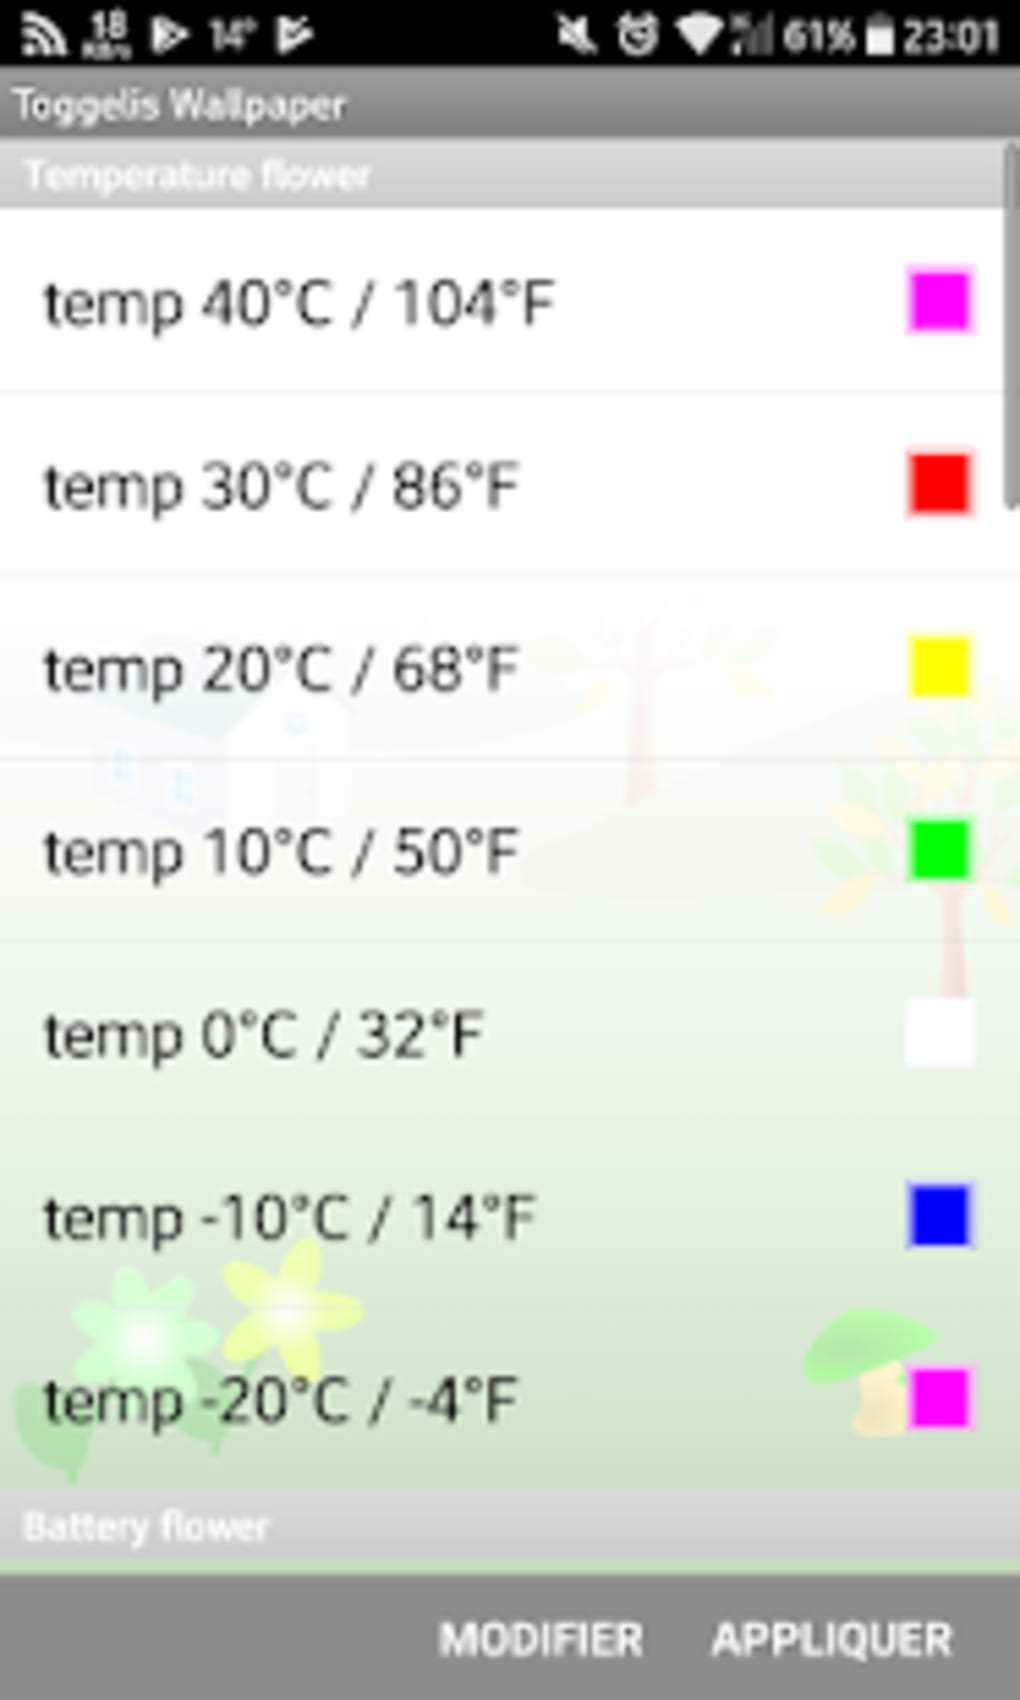 Toggelis Weather Wallpaper APK for Android - Download